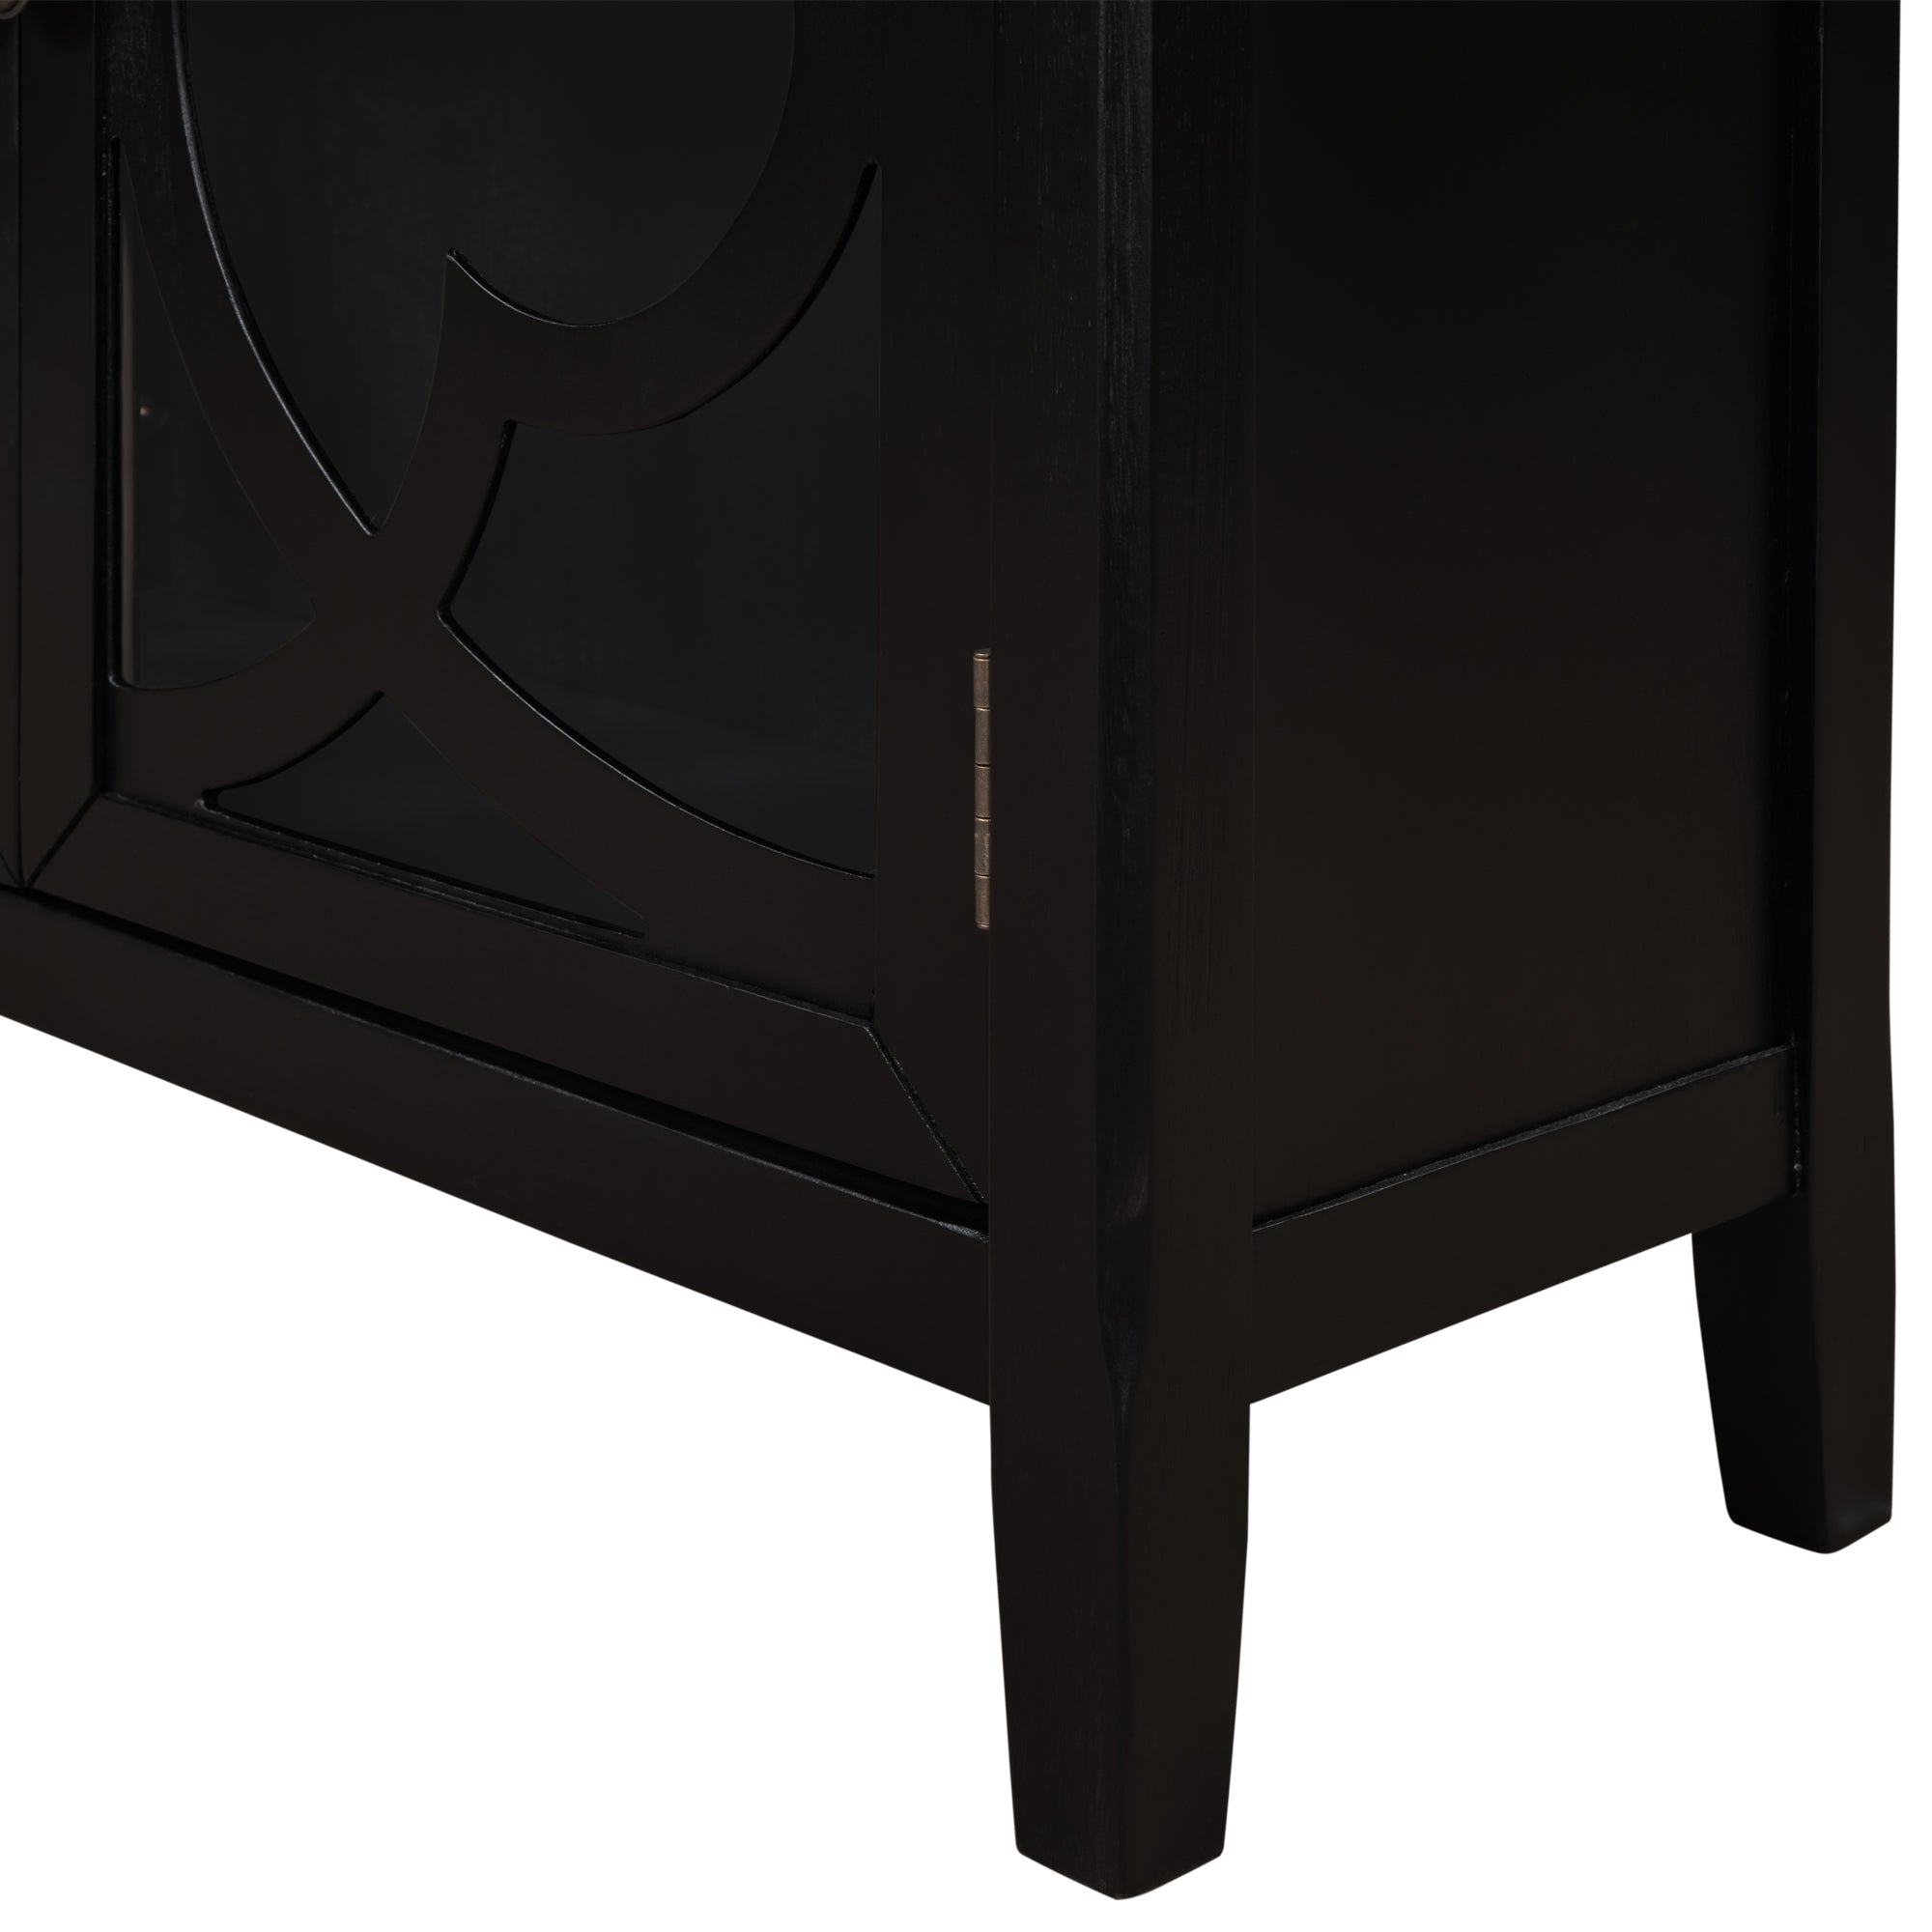 U-style Accent Storage Cabinet Wooden Cabinet with Adjustable Shelf